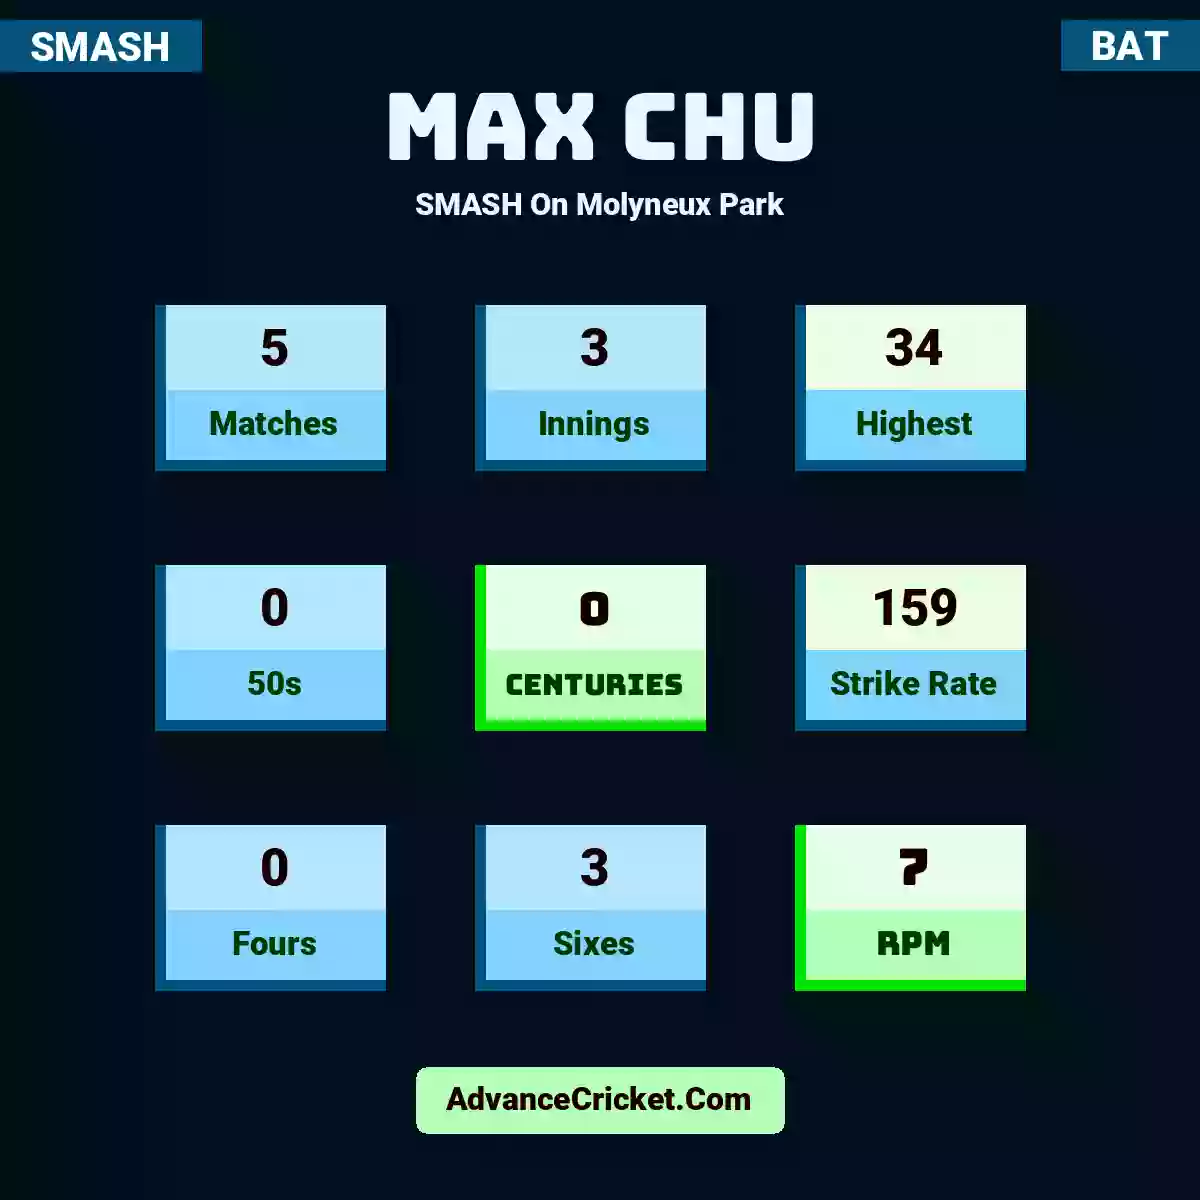 Max Chu SMASH  On Molyneux Park, Max Chu played 5 matches, scored 34 runs as highest, 0 half-centuries, and 0 centuries, with a strike rate of 159. M.Chu hit 0 fours and 3 sixes, with an RPM of 7.